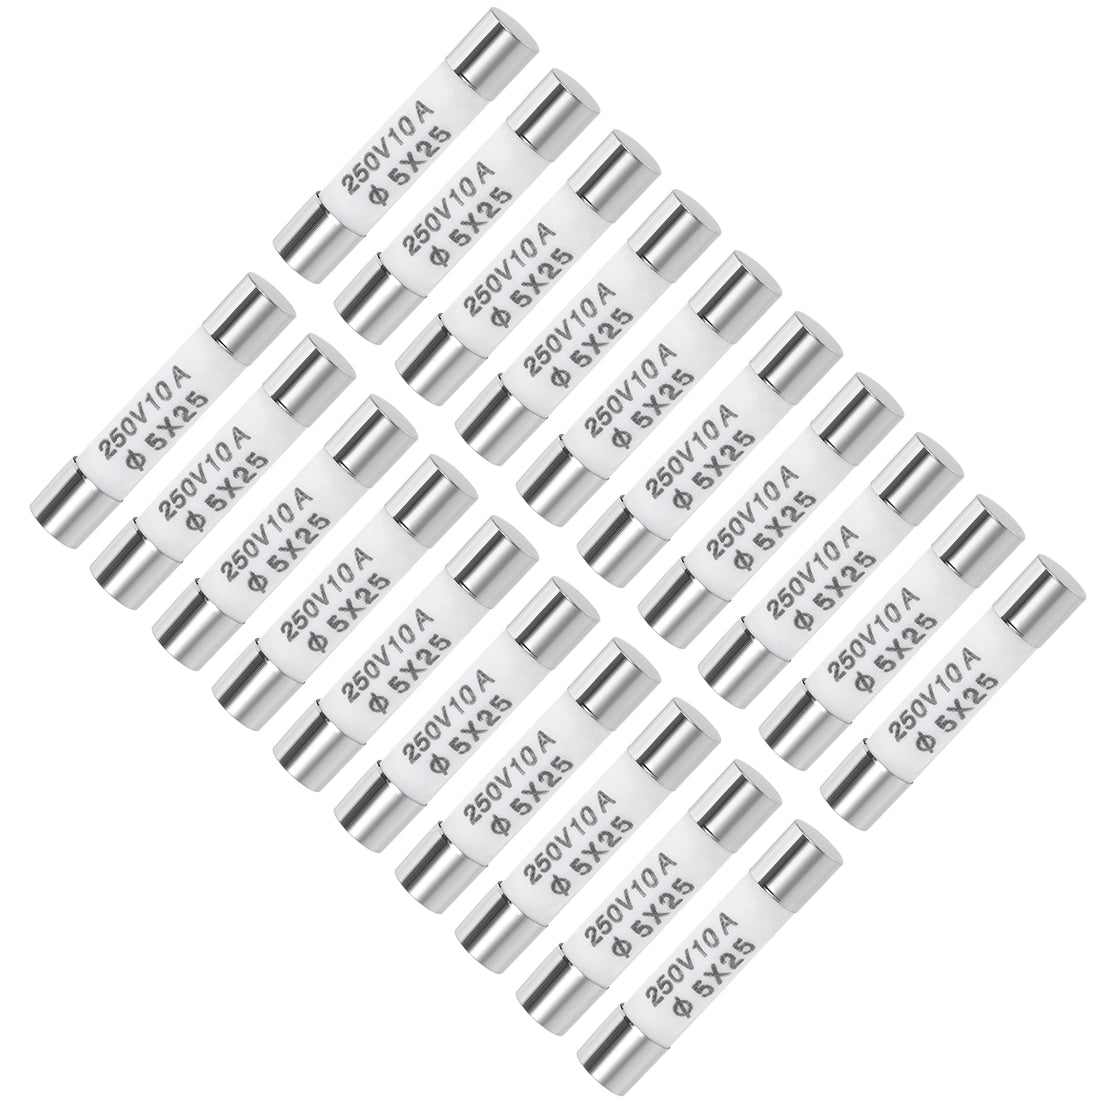 uxcell Uxcell Cartridge Fuse 10A 250V 5x25mm Fast Blow Audio Alarm Amplifier Ceramic 20pcs